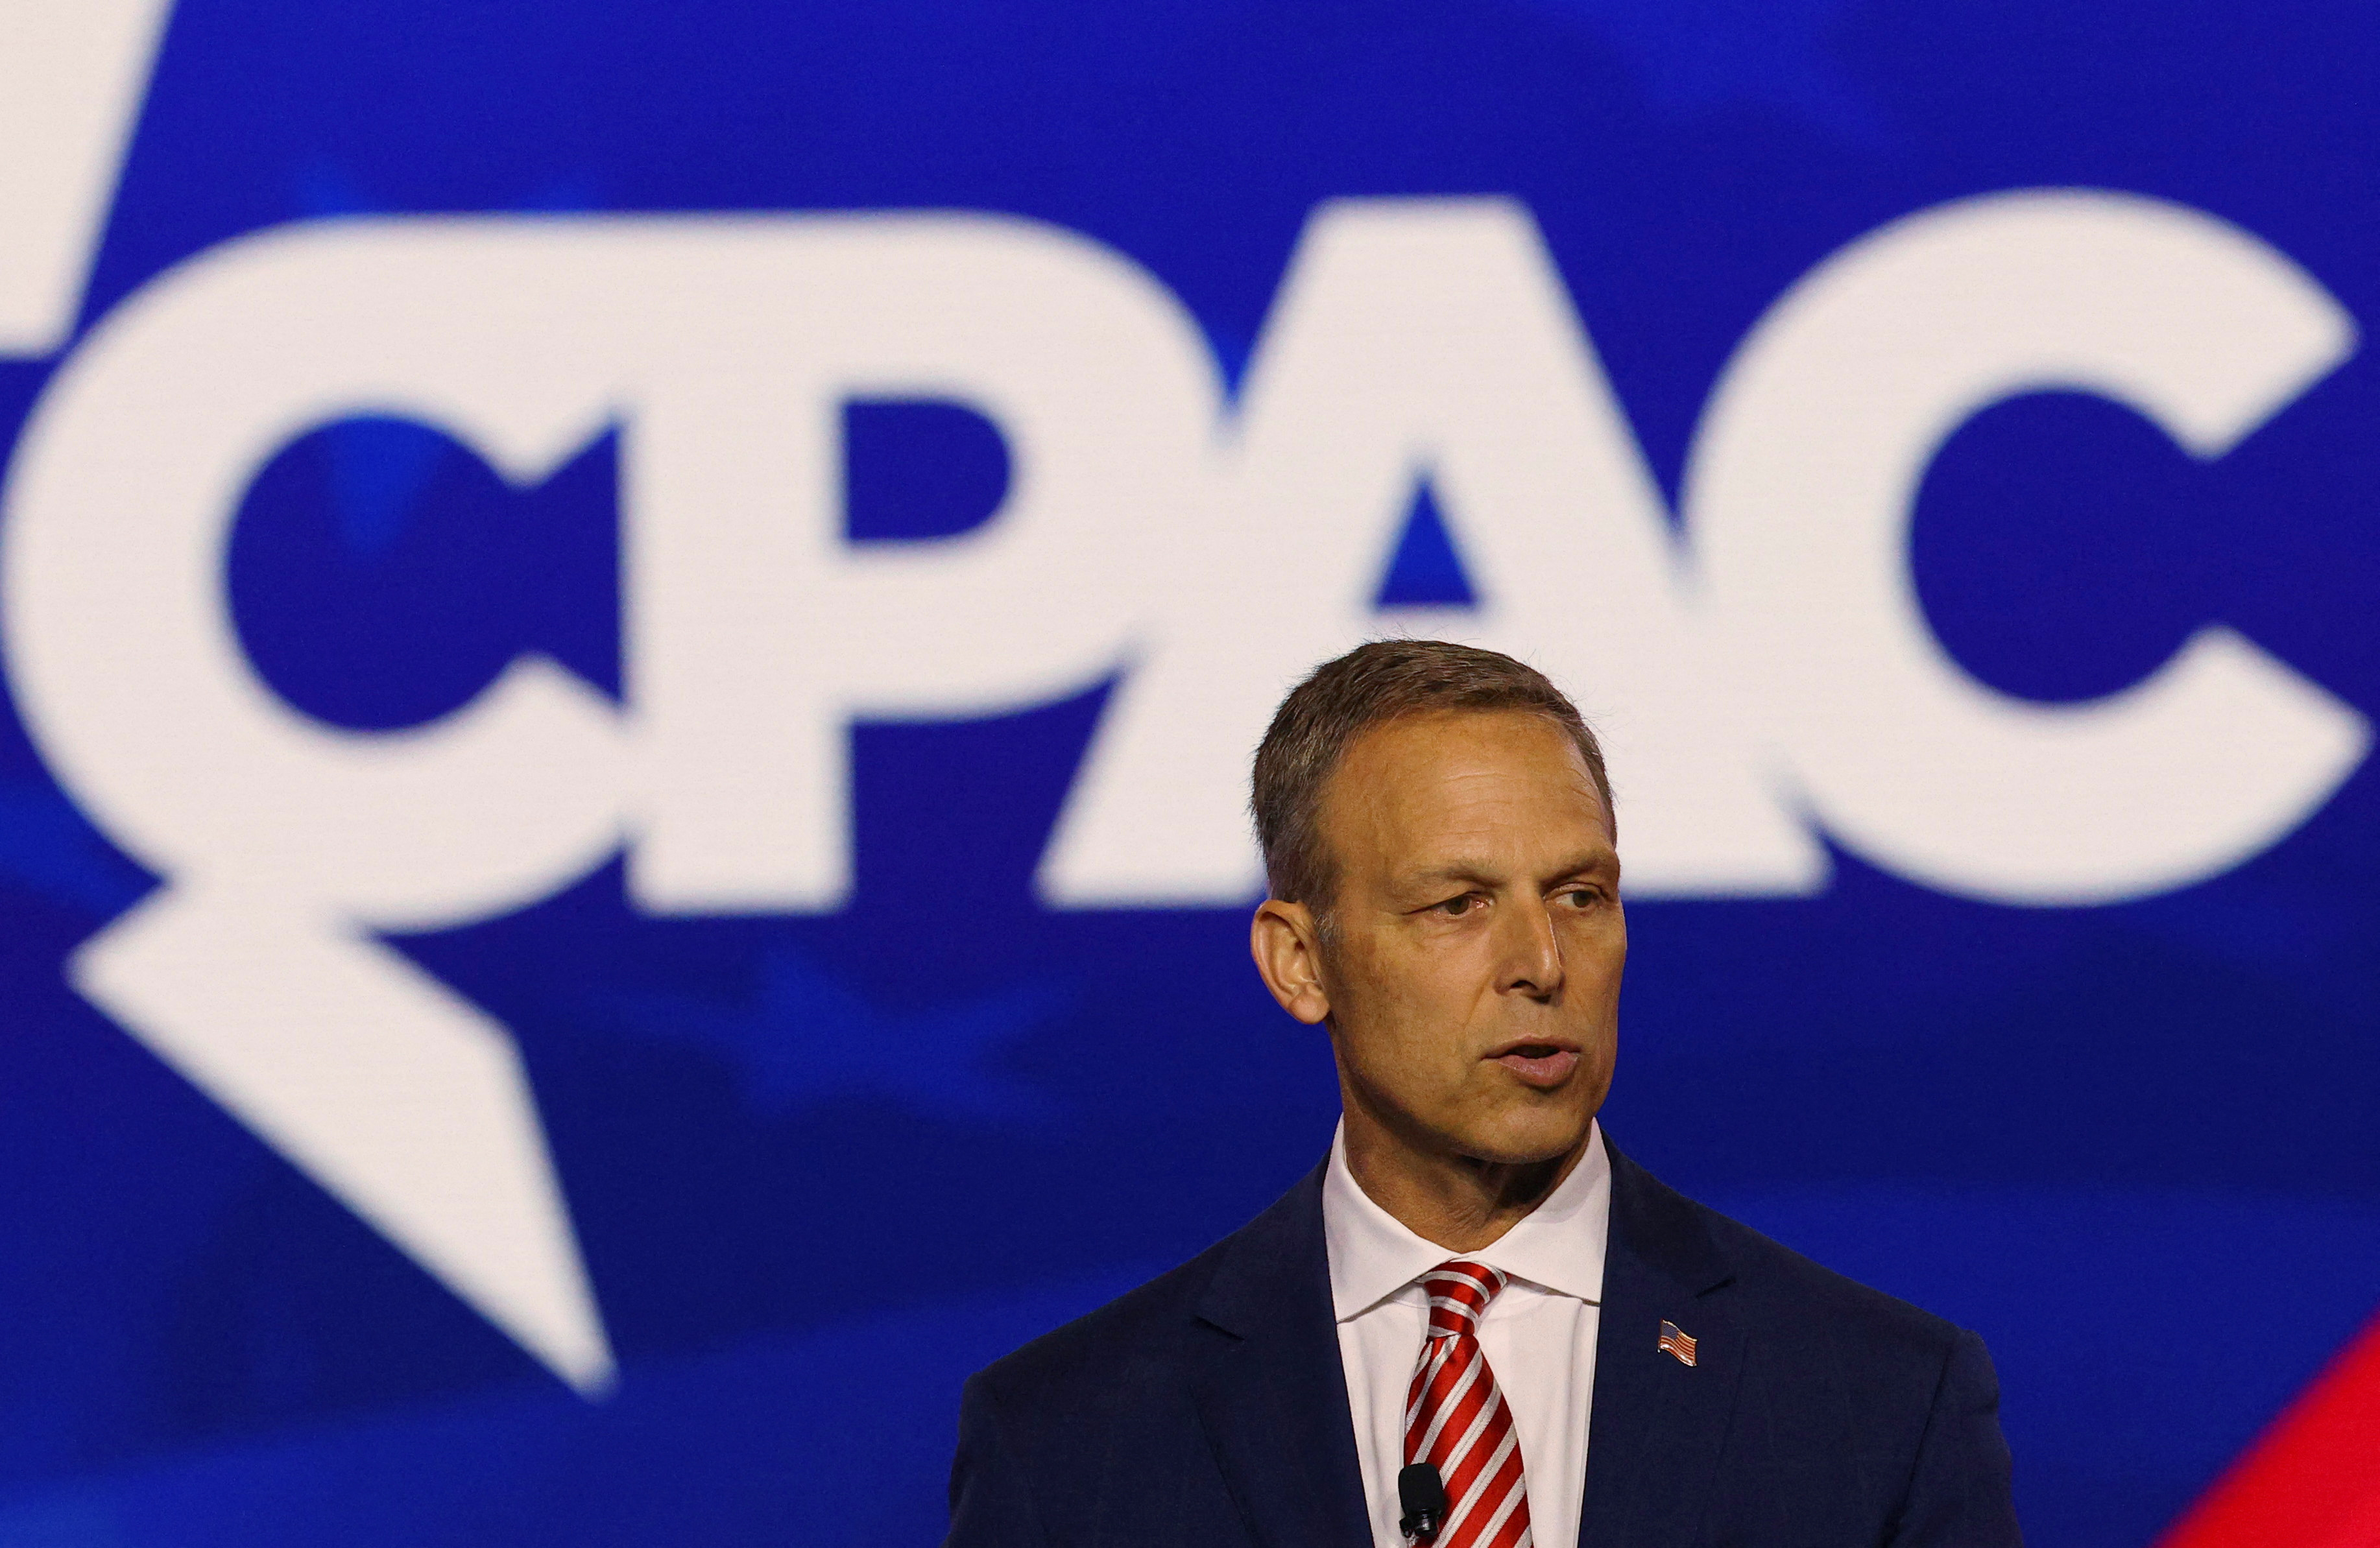 FILE PHOTO - The 2022 Conservative Political Action Conference (CPAC) is held in Dallas